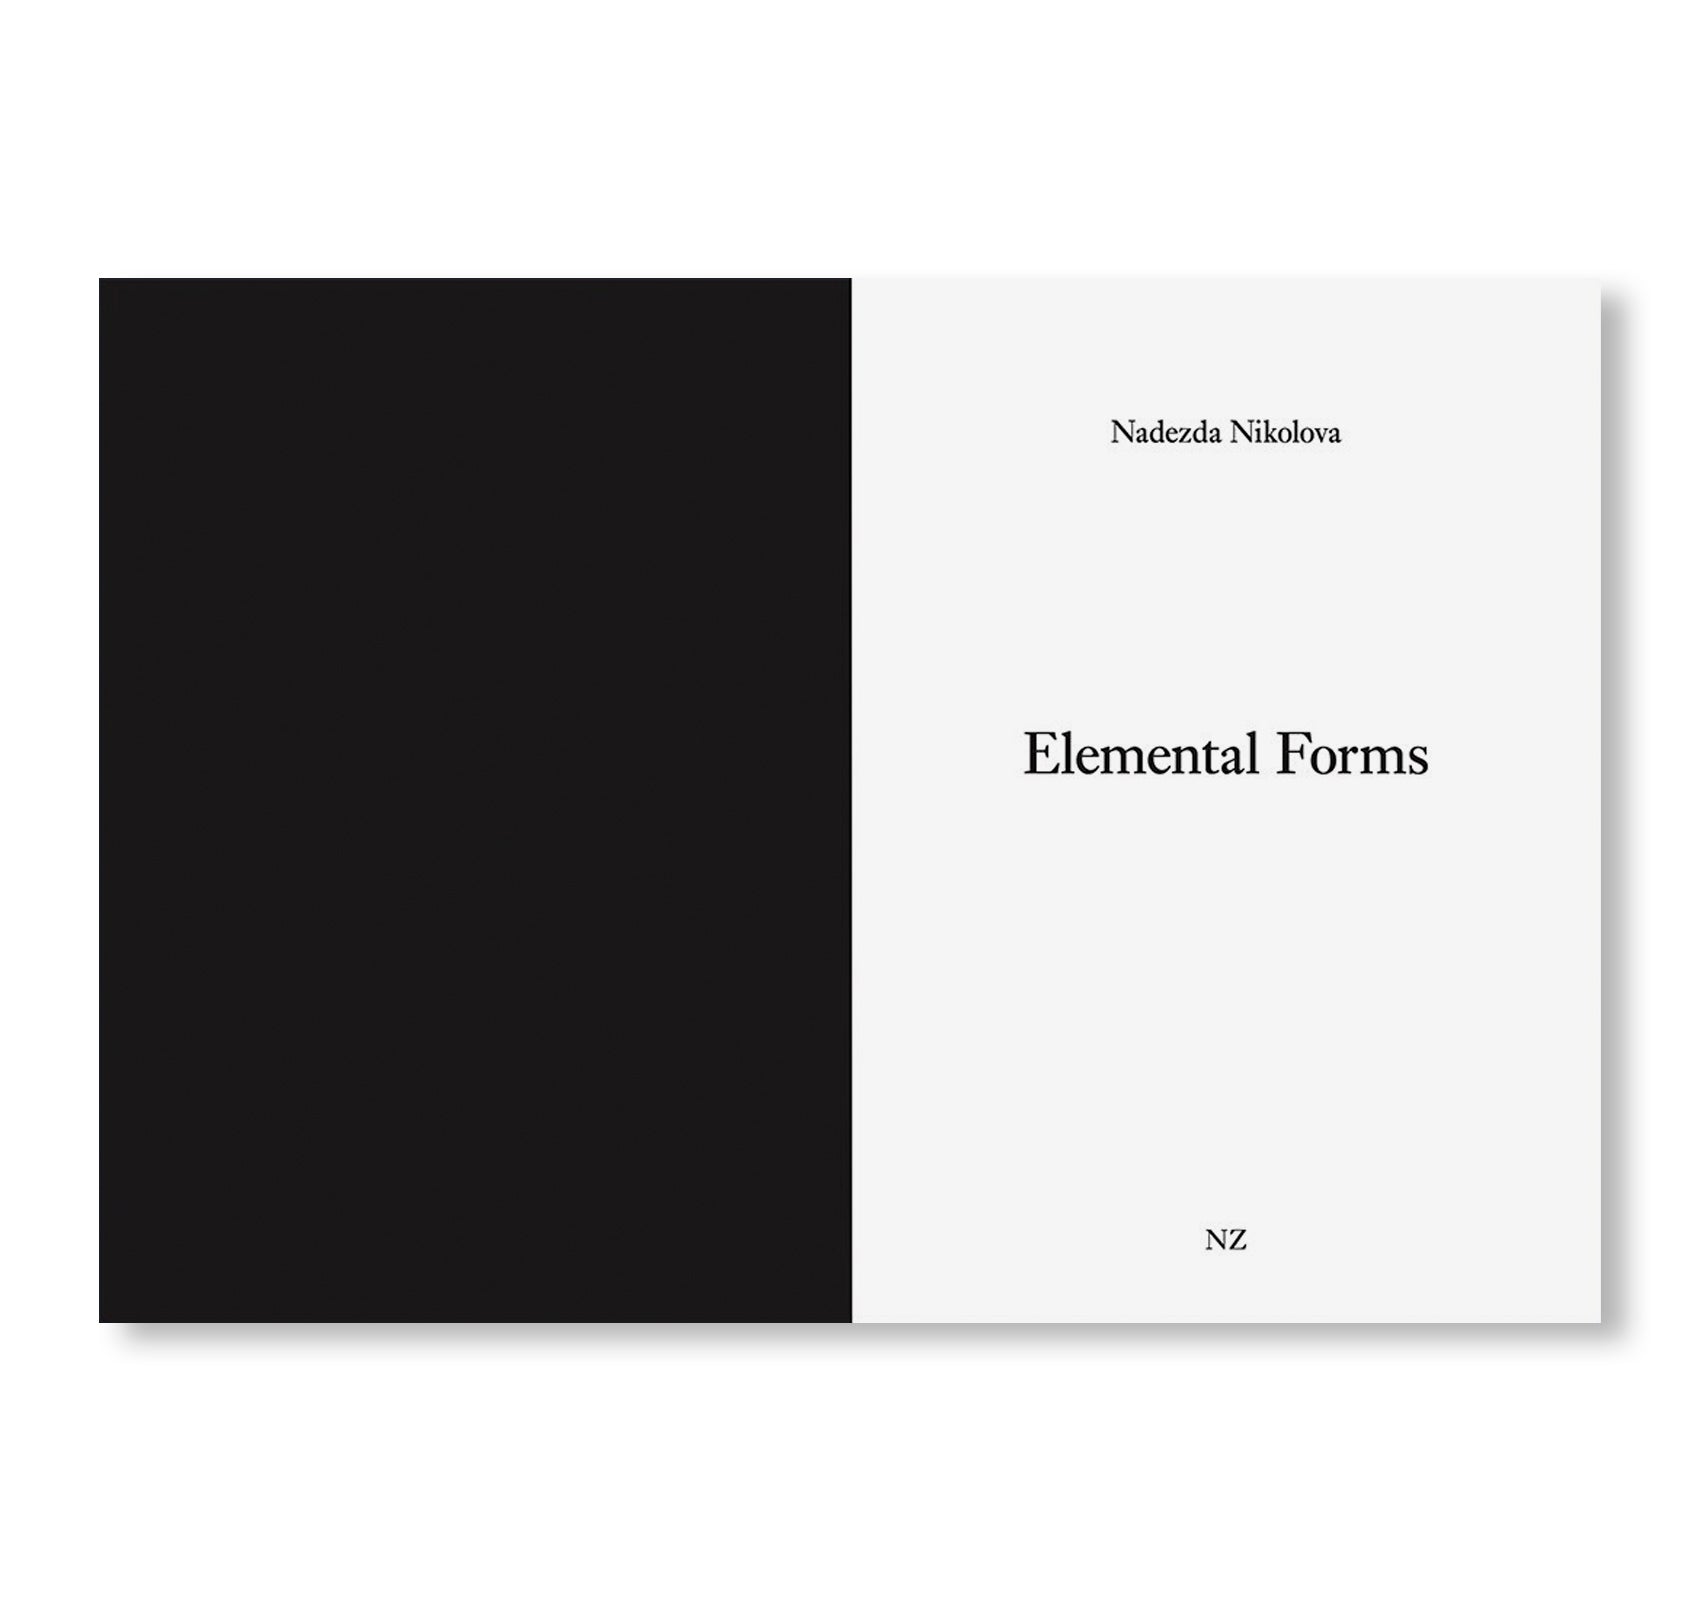 ONE PICTURE BOOK TWO #33: ELEMENTAL FORMS by Nadezda Nikolova